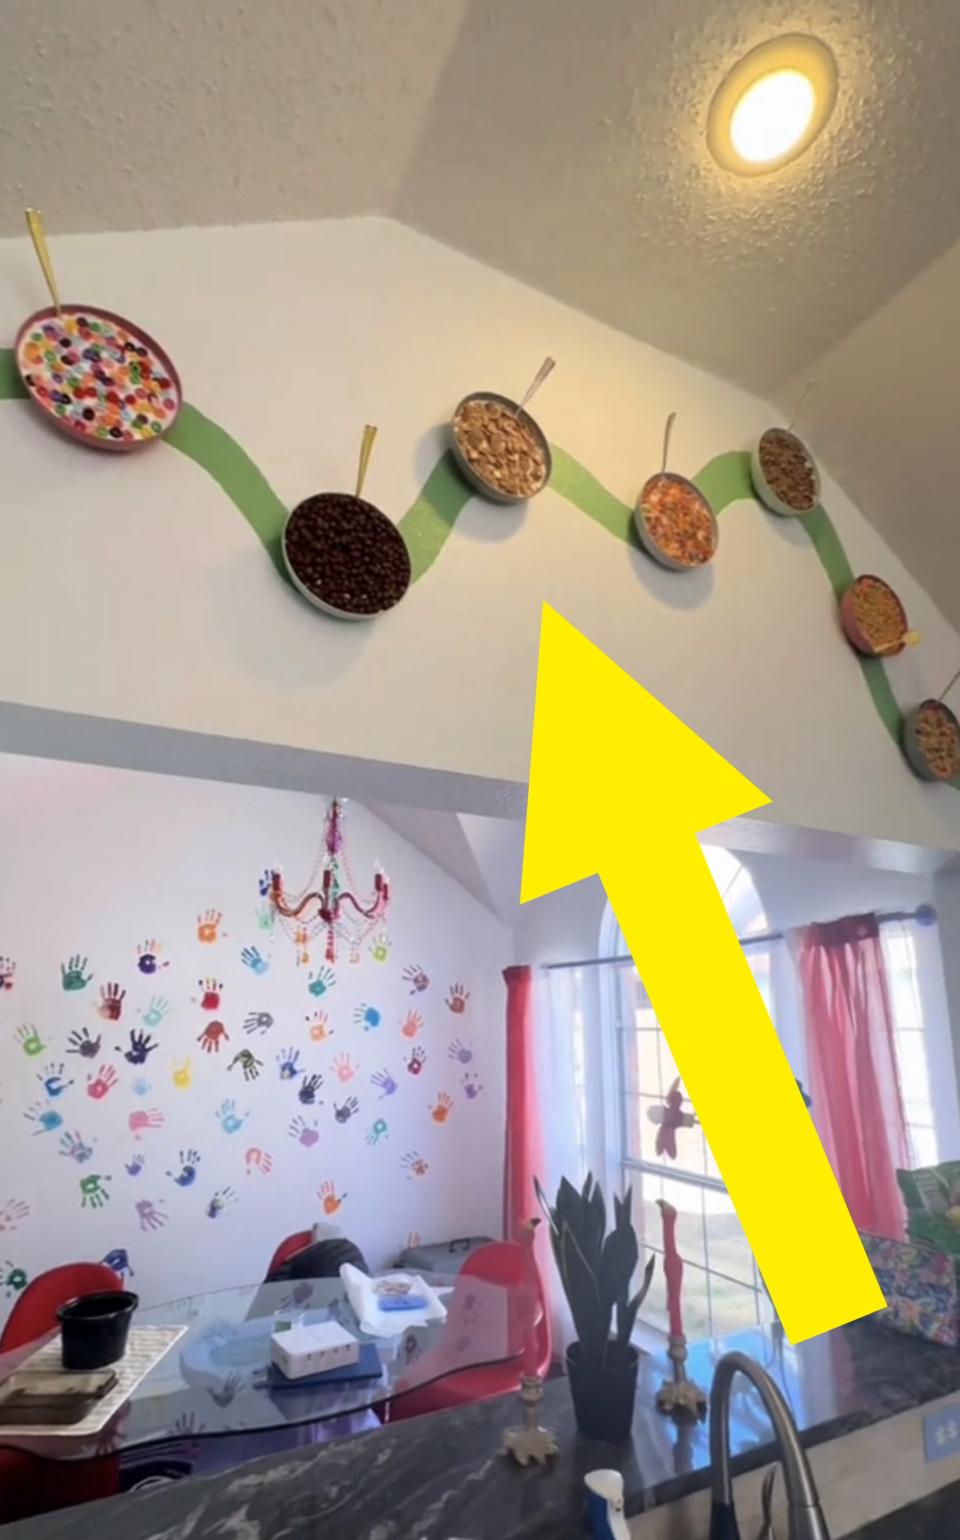 A closer shot of the cereal wall, featuring the fake bowls of cereal arranged in a wavy pattern on the wall as an art piece